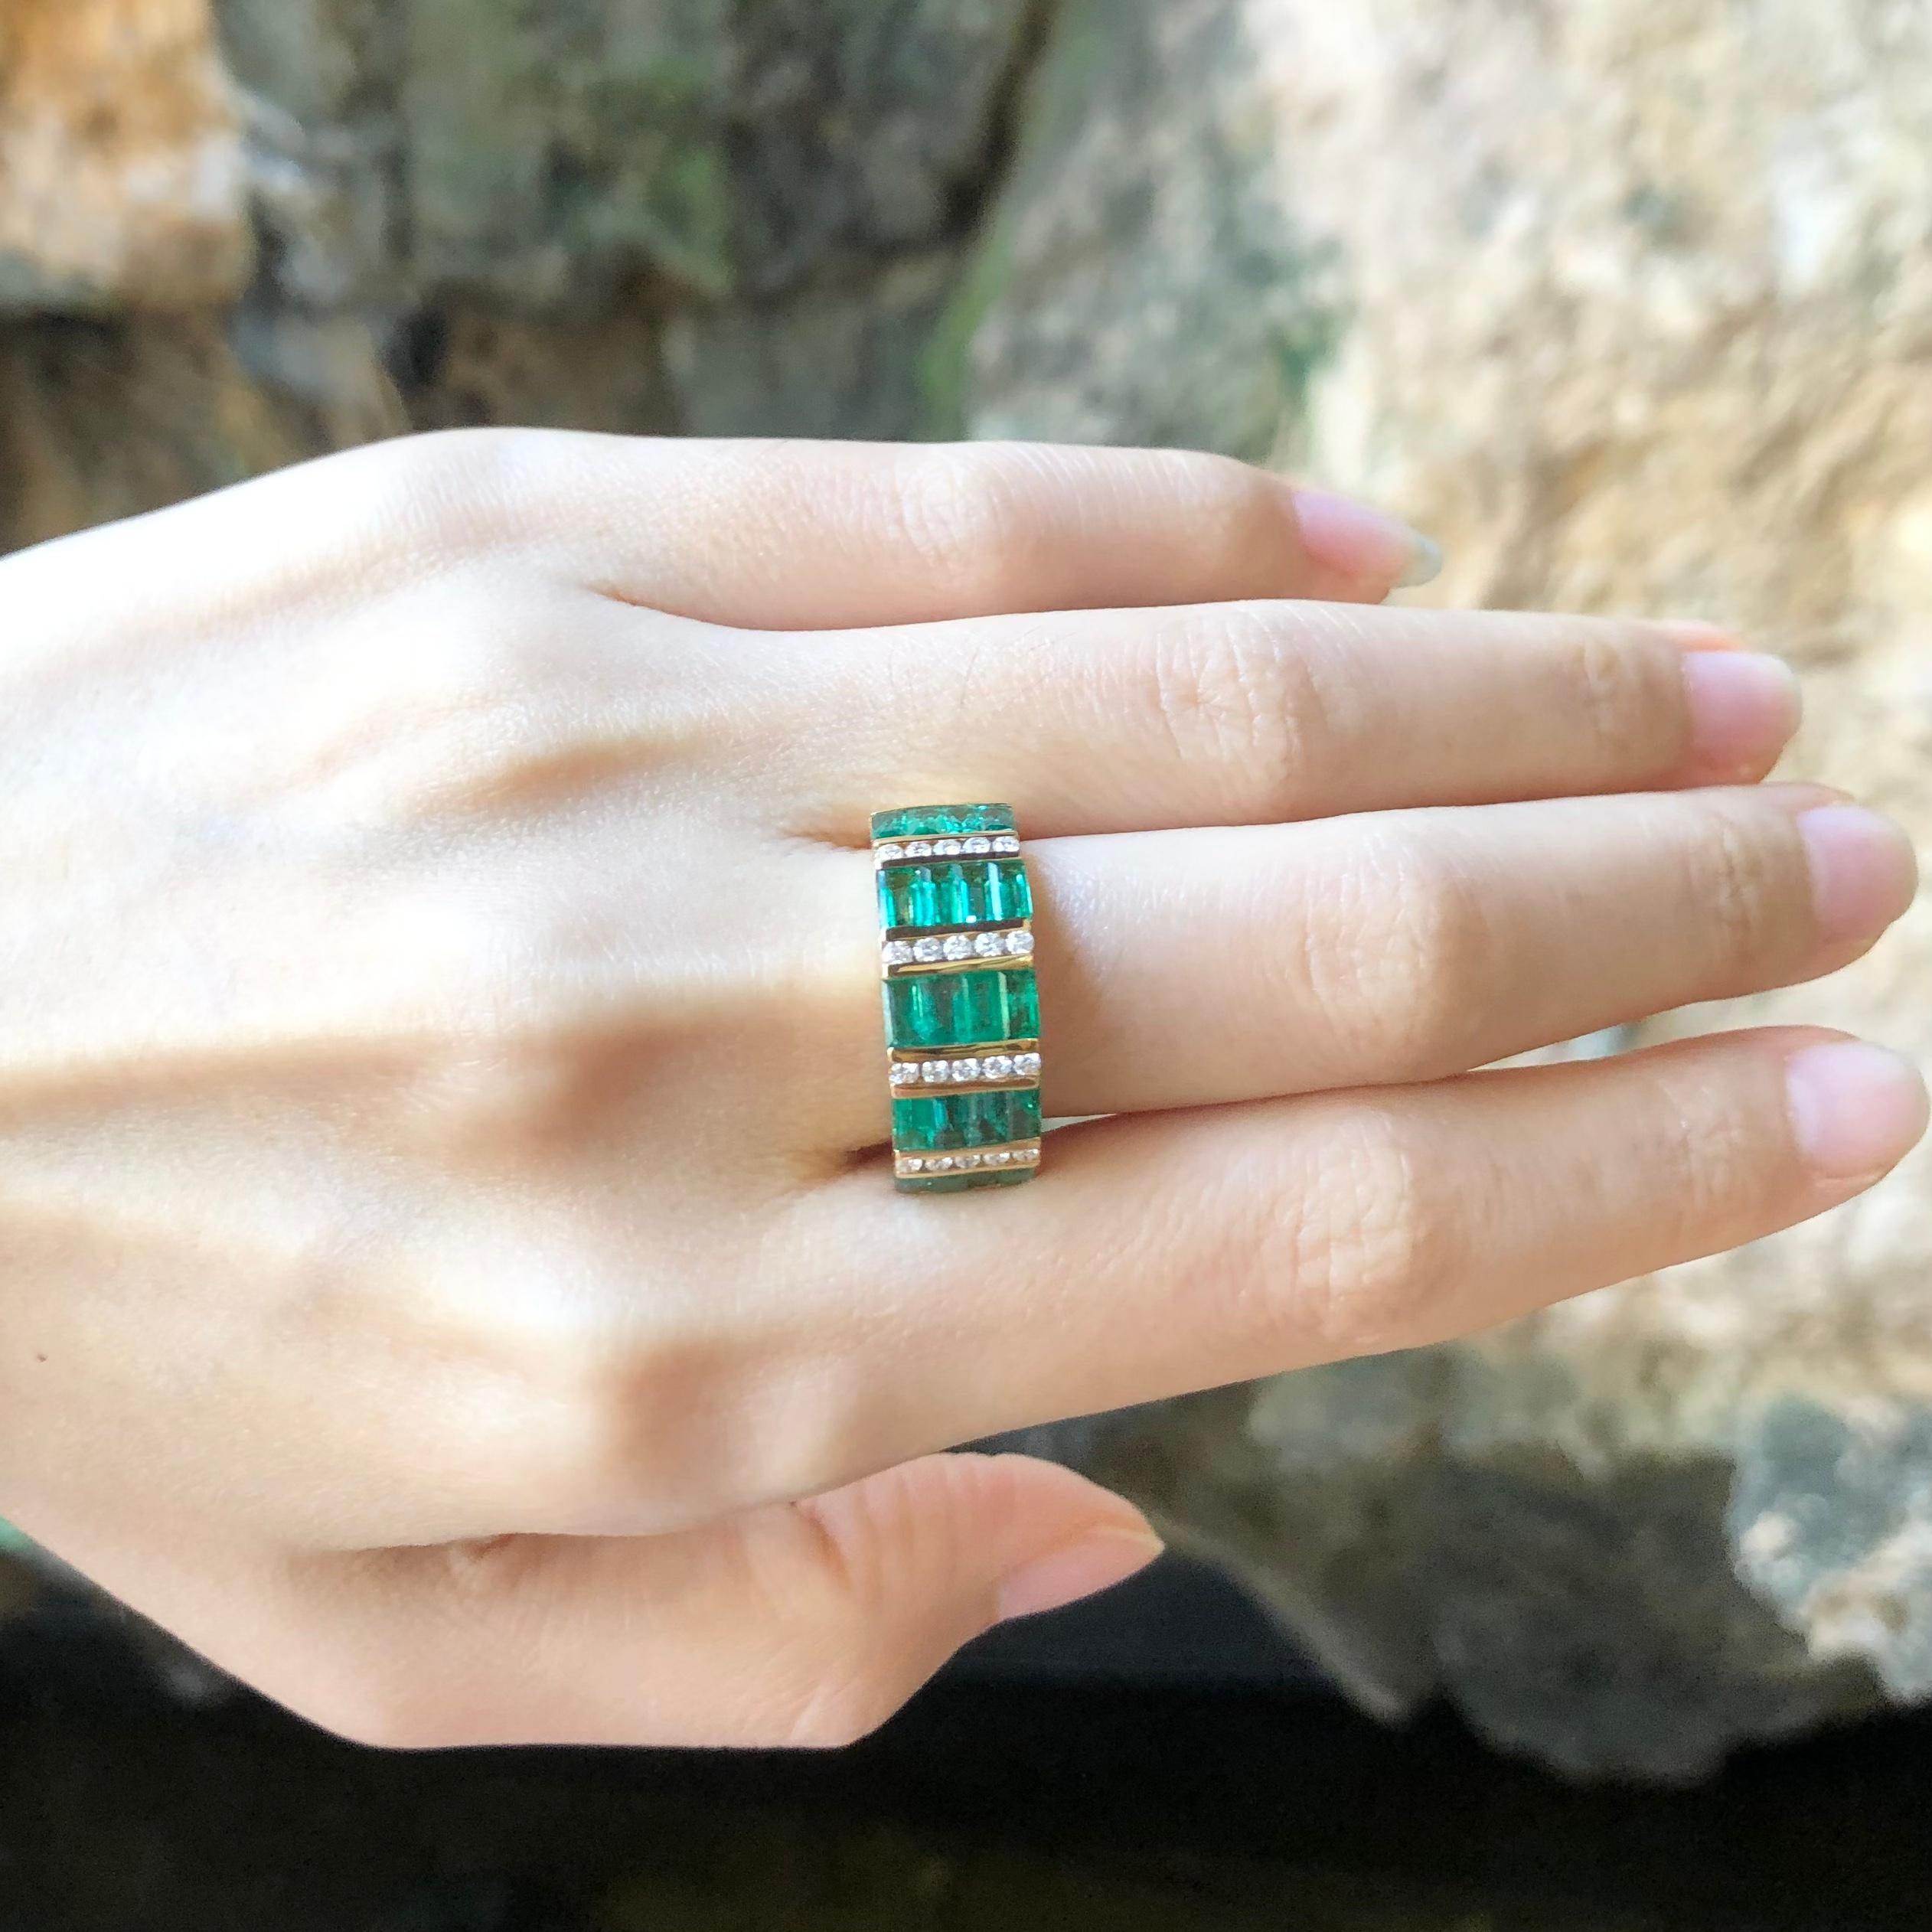 Emerald 2.71 carats with Diamond 0.25 carat Ring set in 18 Karat Gold Settings

Width:  2.3 cm 
Length: 0.8 cm
Ring Size: 54
Total Weight: 9.91 grams


